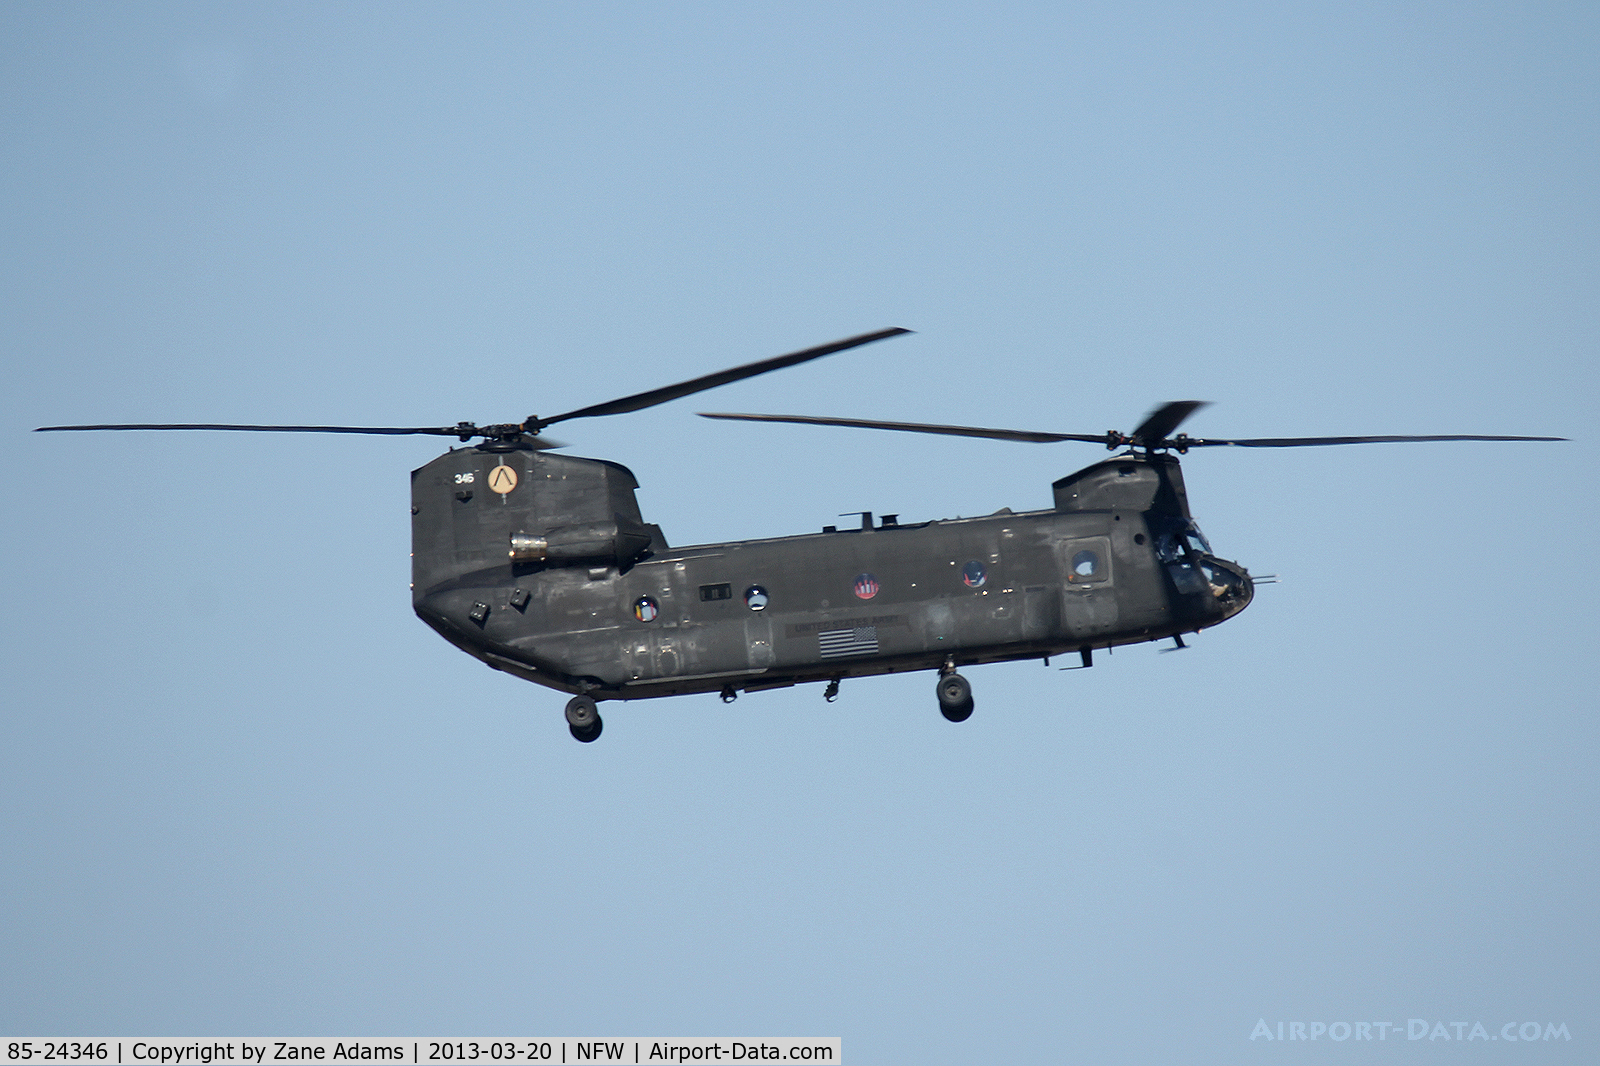 85-24346, 1985 Boeing CH-47D Chinook C/N M.3116, US Army Chinook landing at NAS Fort Worth